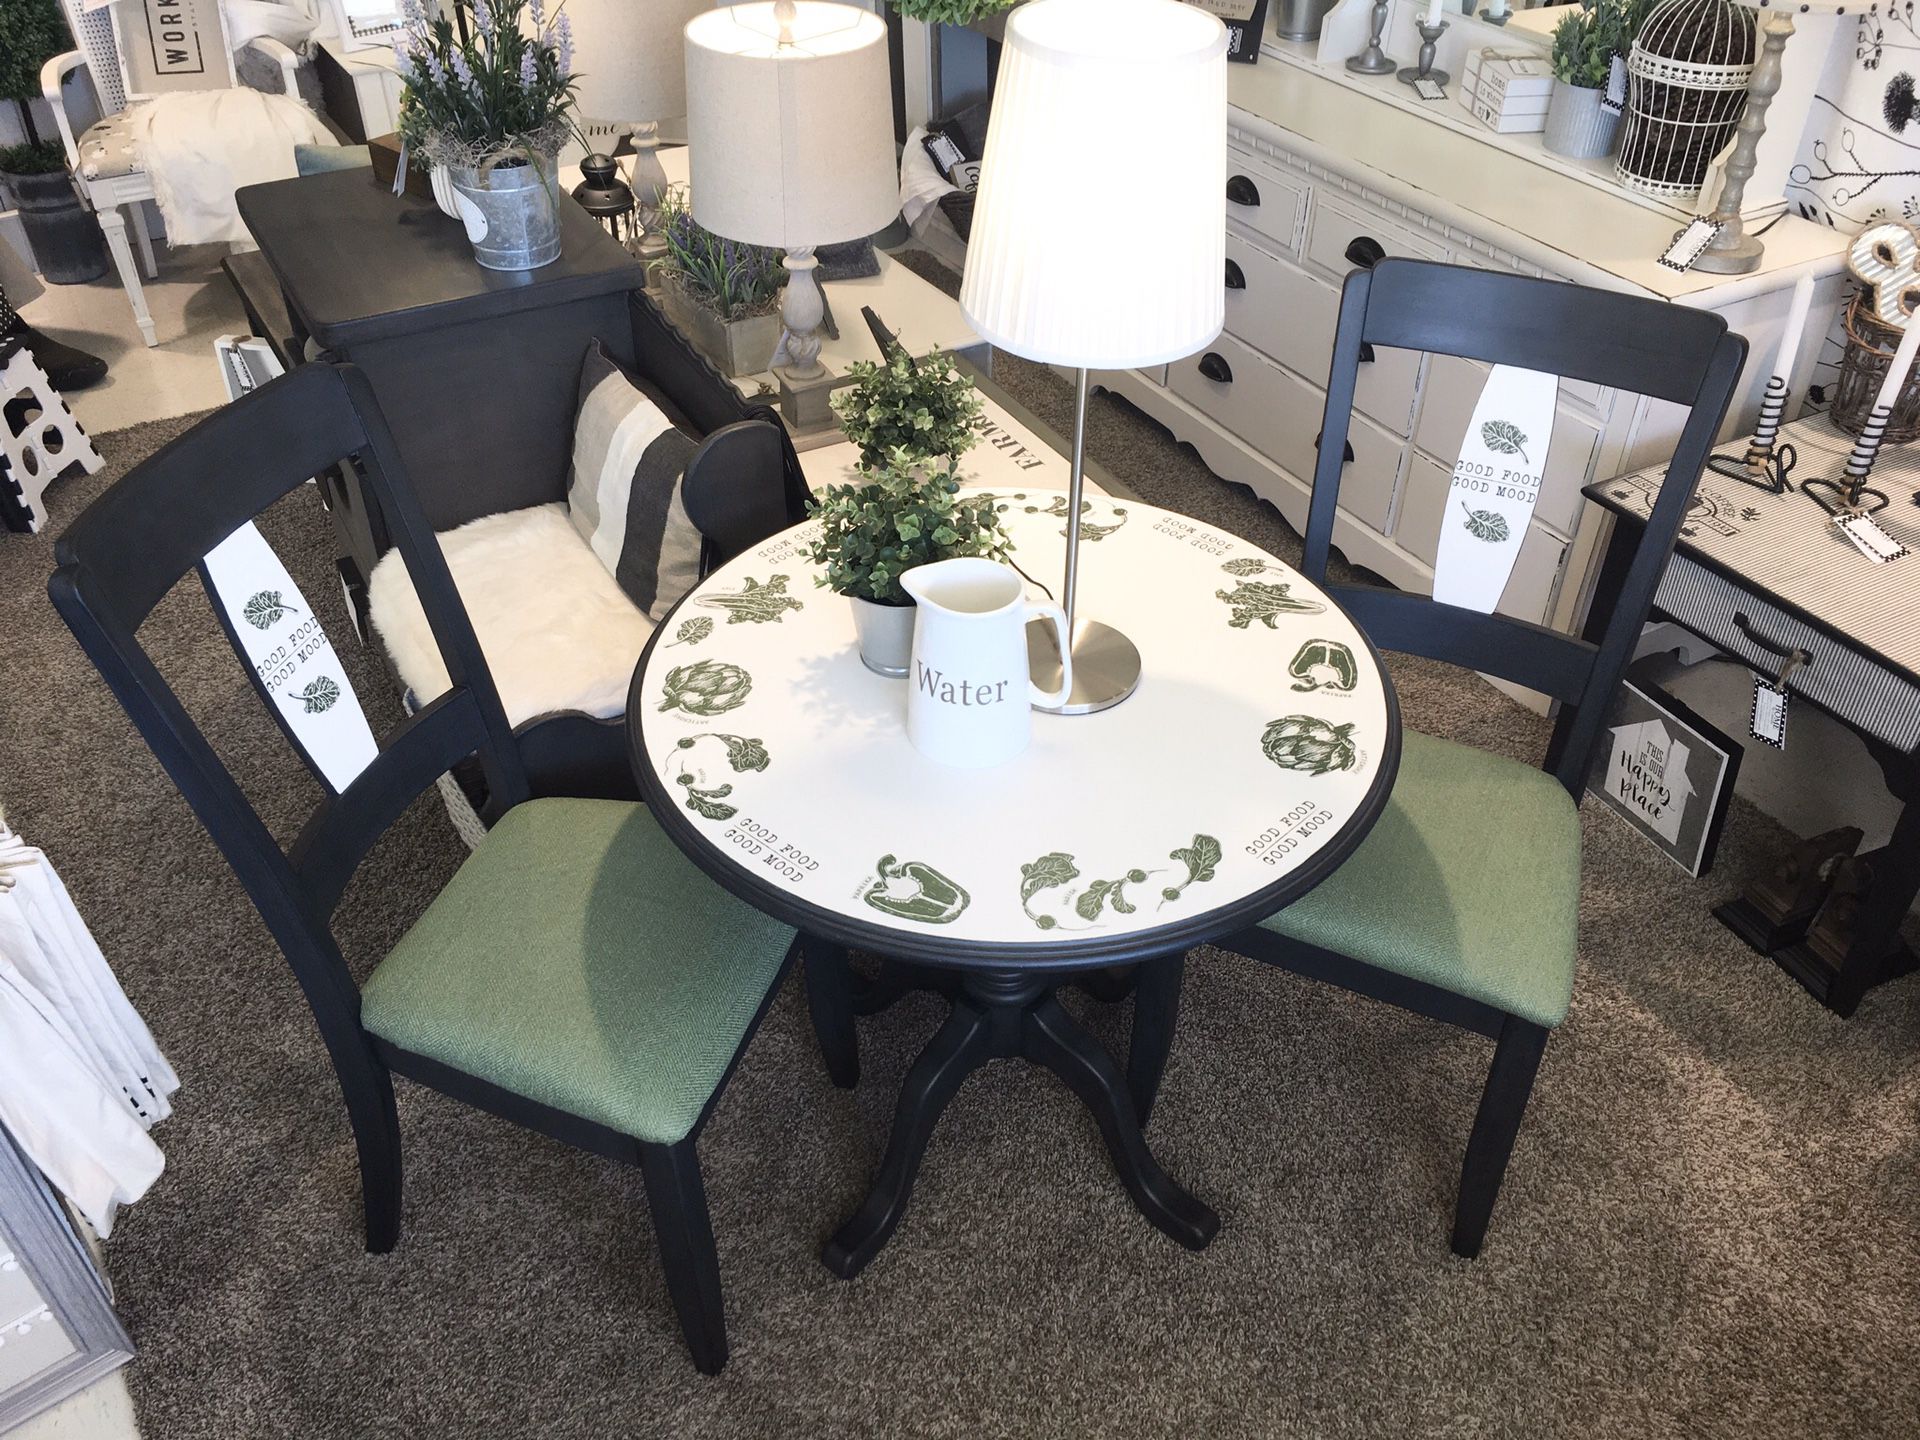 Table chairs seating eating upholstery dining room kitchen living painted furniture artisan